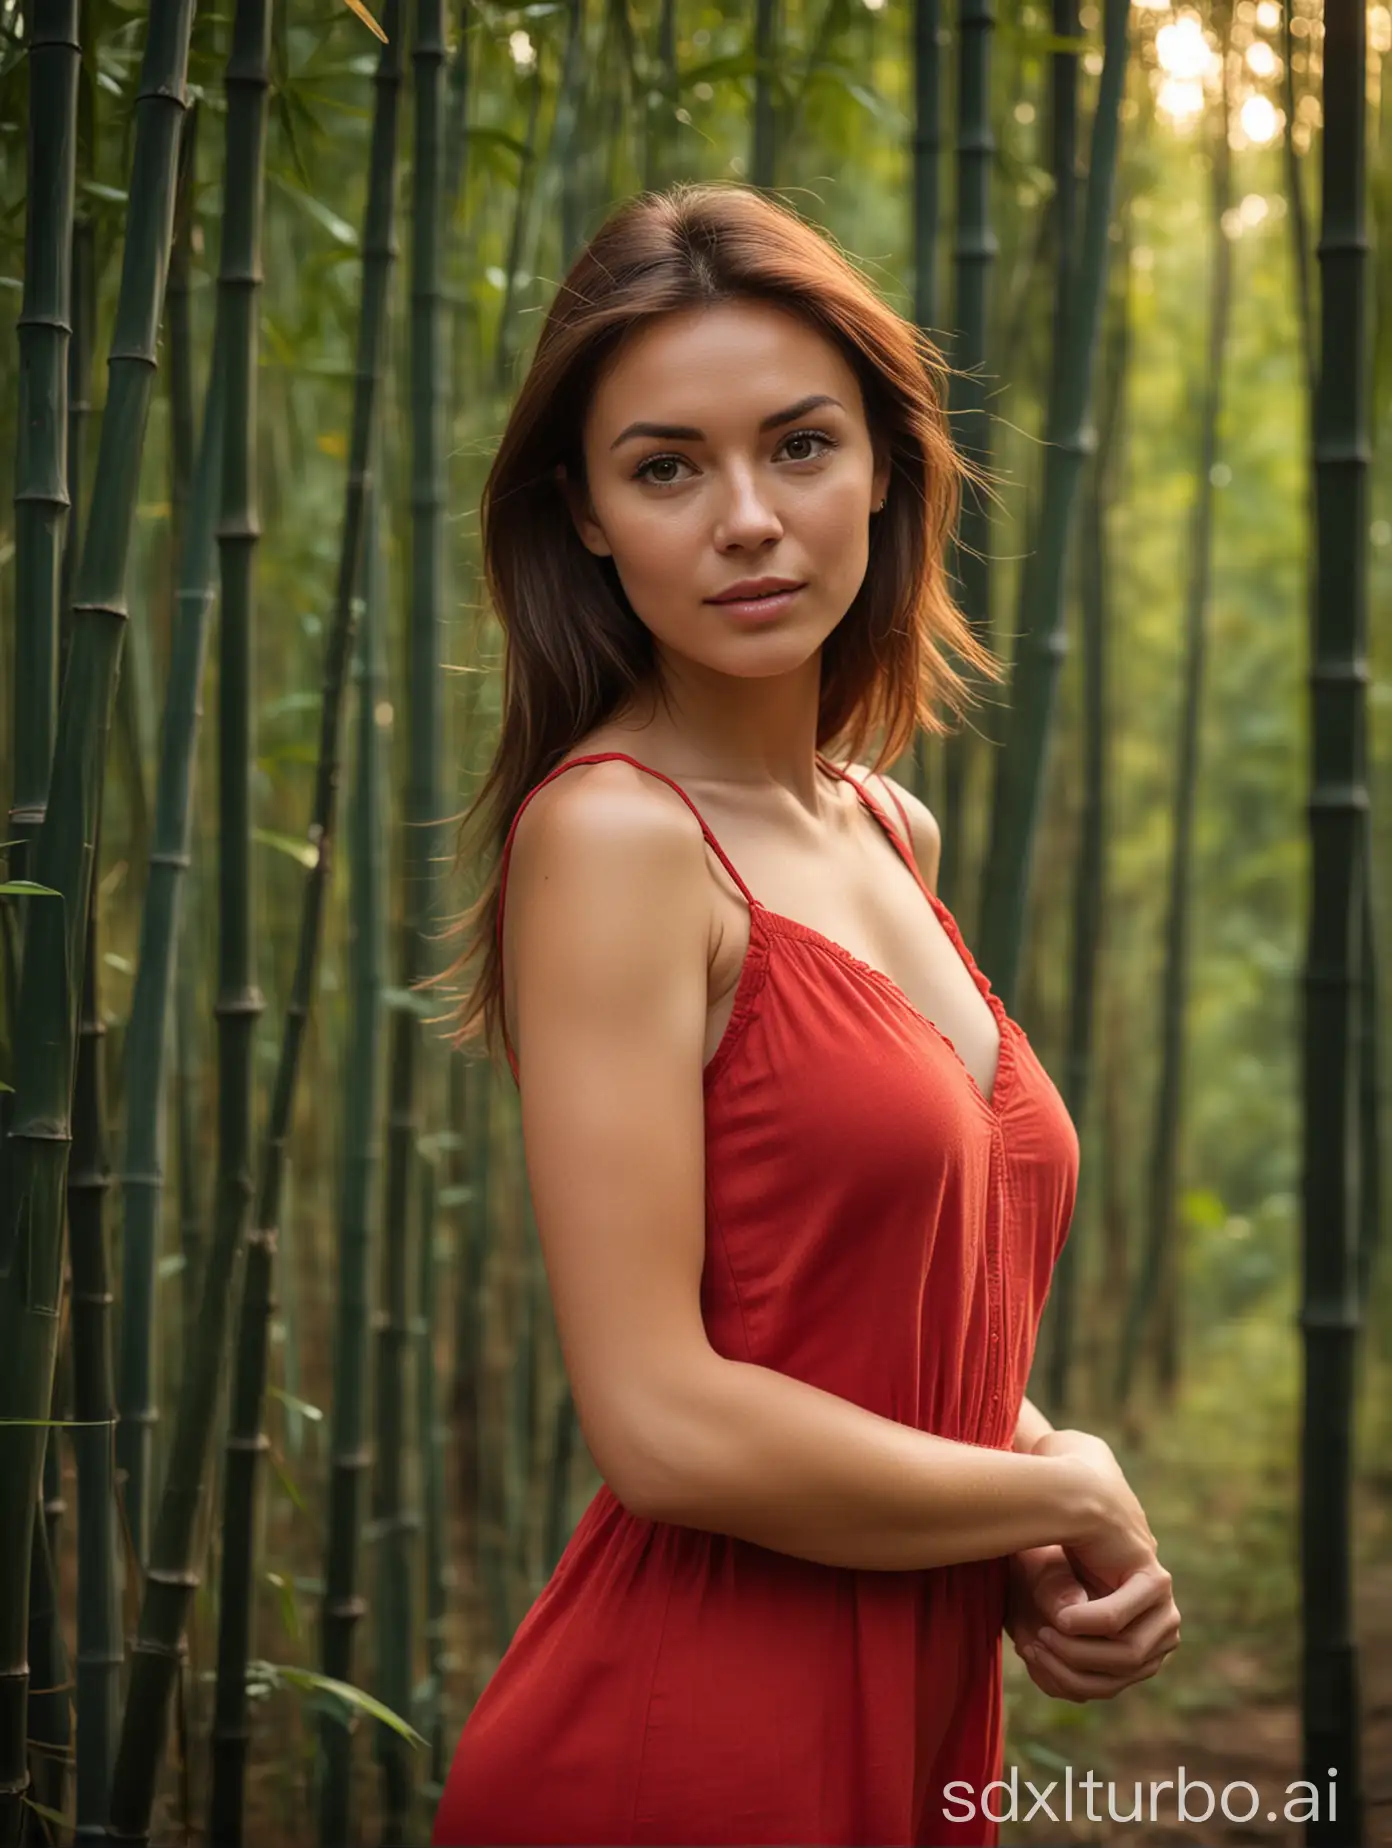 Woman-in-Red-Sundress-Amidst-Dark-Bamboo-Forest